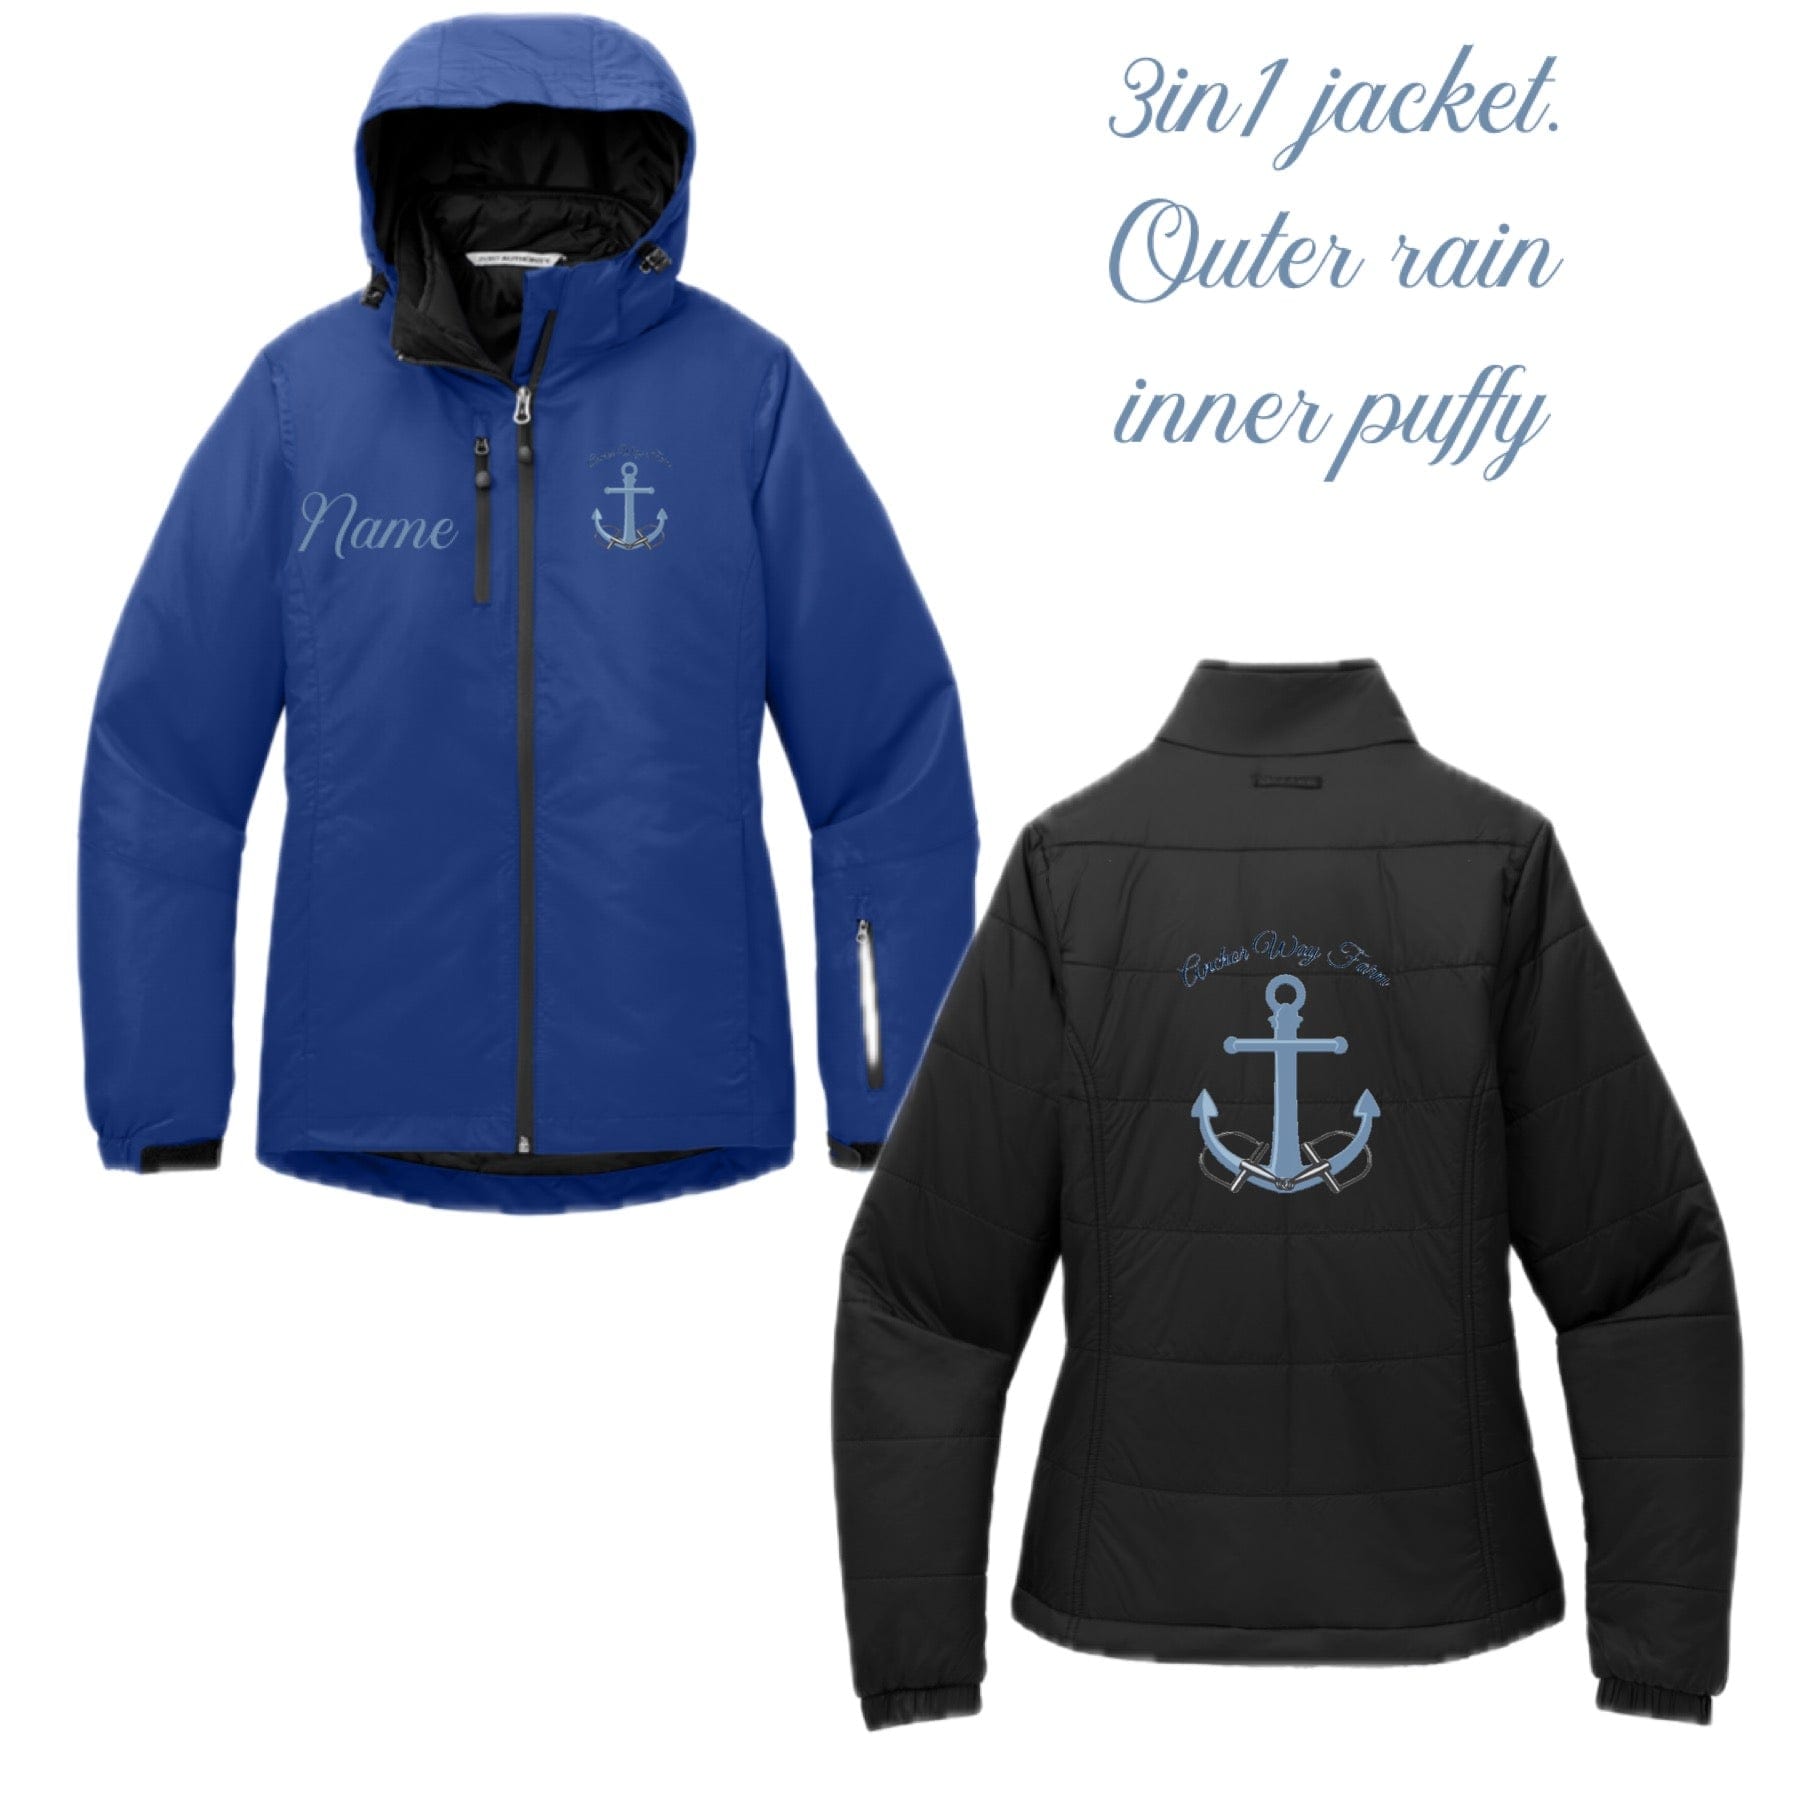 Equestrian Team Apparel Anchor Way Farm Heavy 3 in 1 Jacket equestrian team apparel online tack store mobile tack store custom farm apparel custom show stable clothing equestrian lifestyle horse show clothing riding clothes horses equestrian tack store